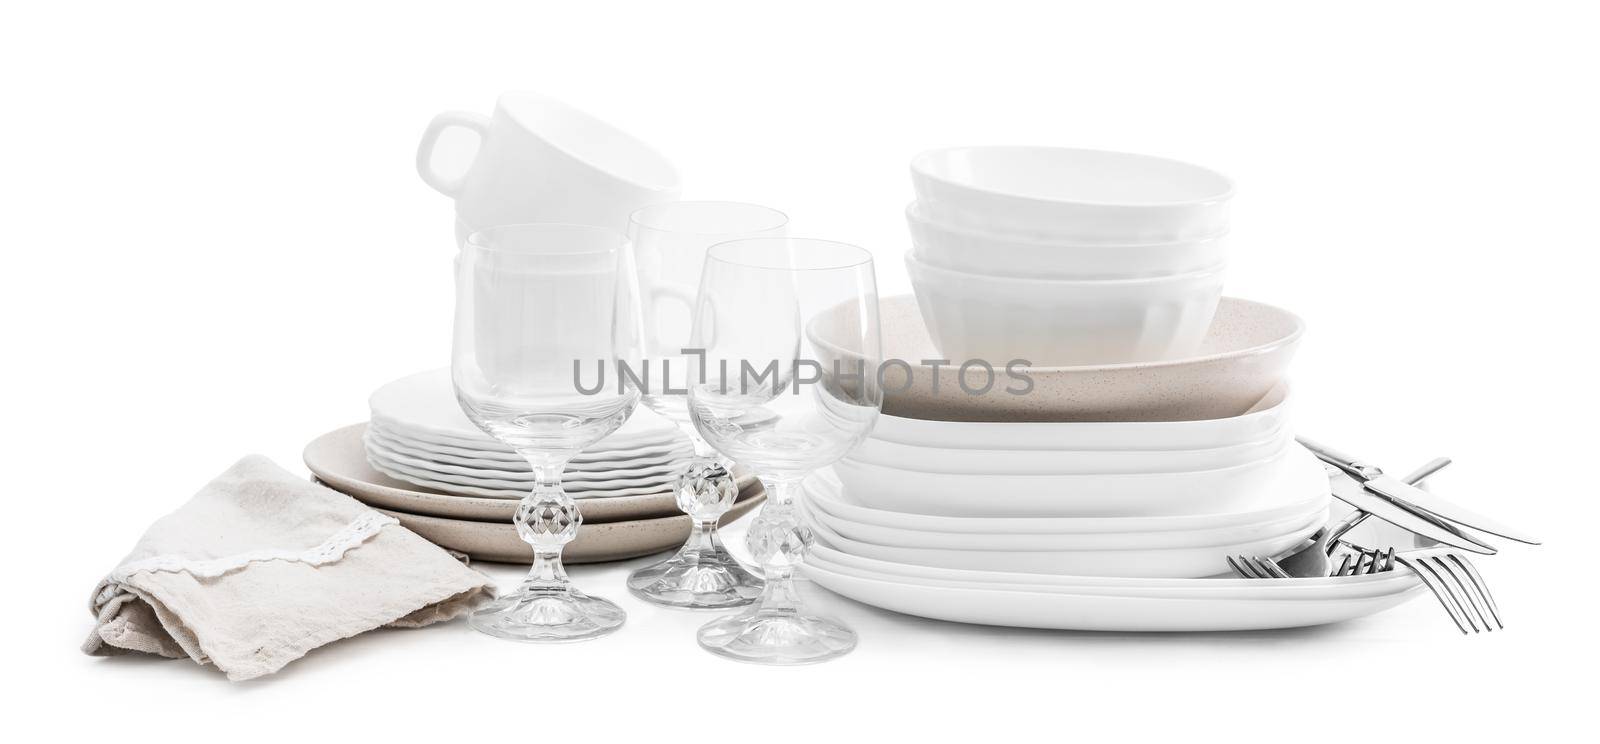 Set of white and beuge ceramic dishes and crystal glasses isolated on white background